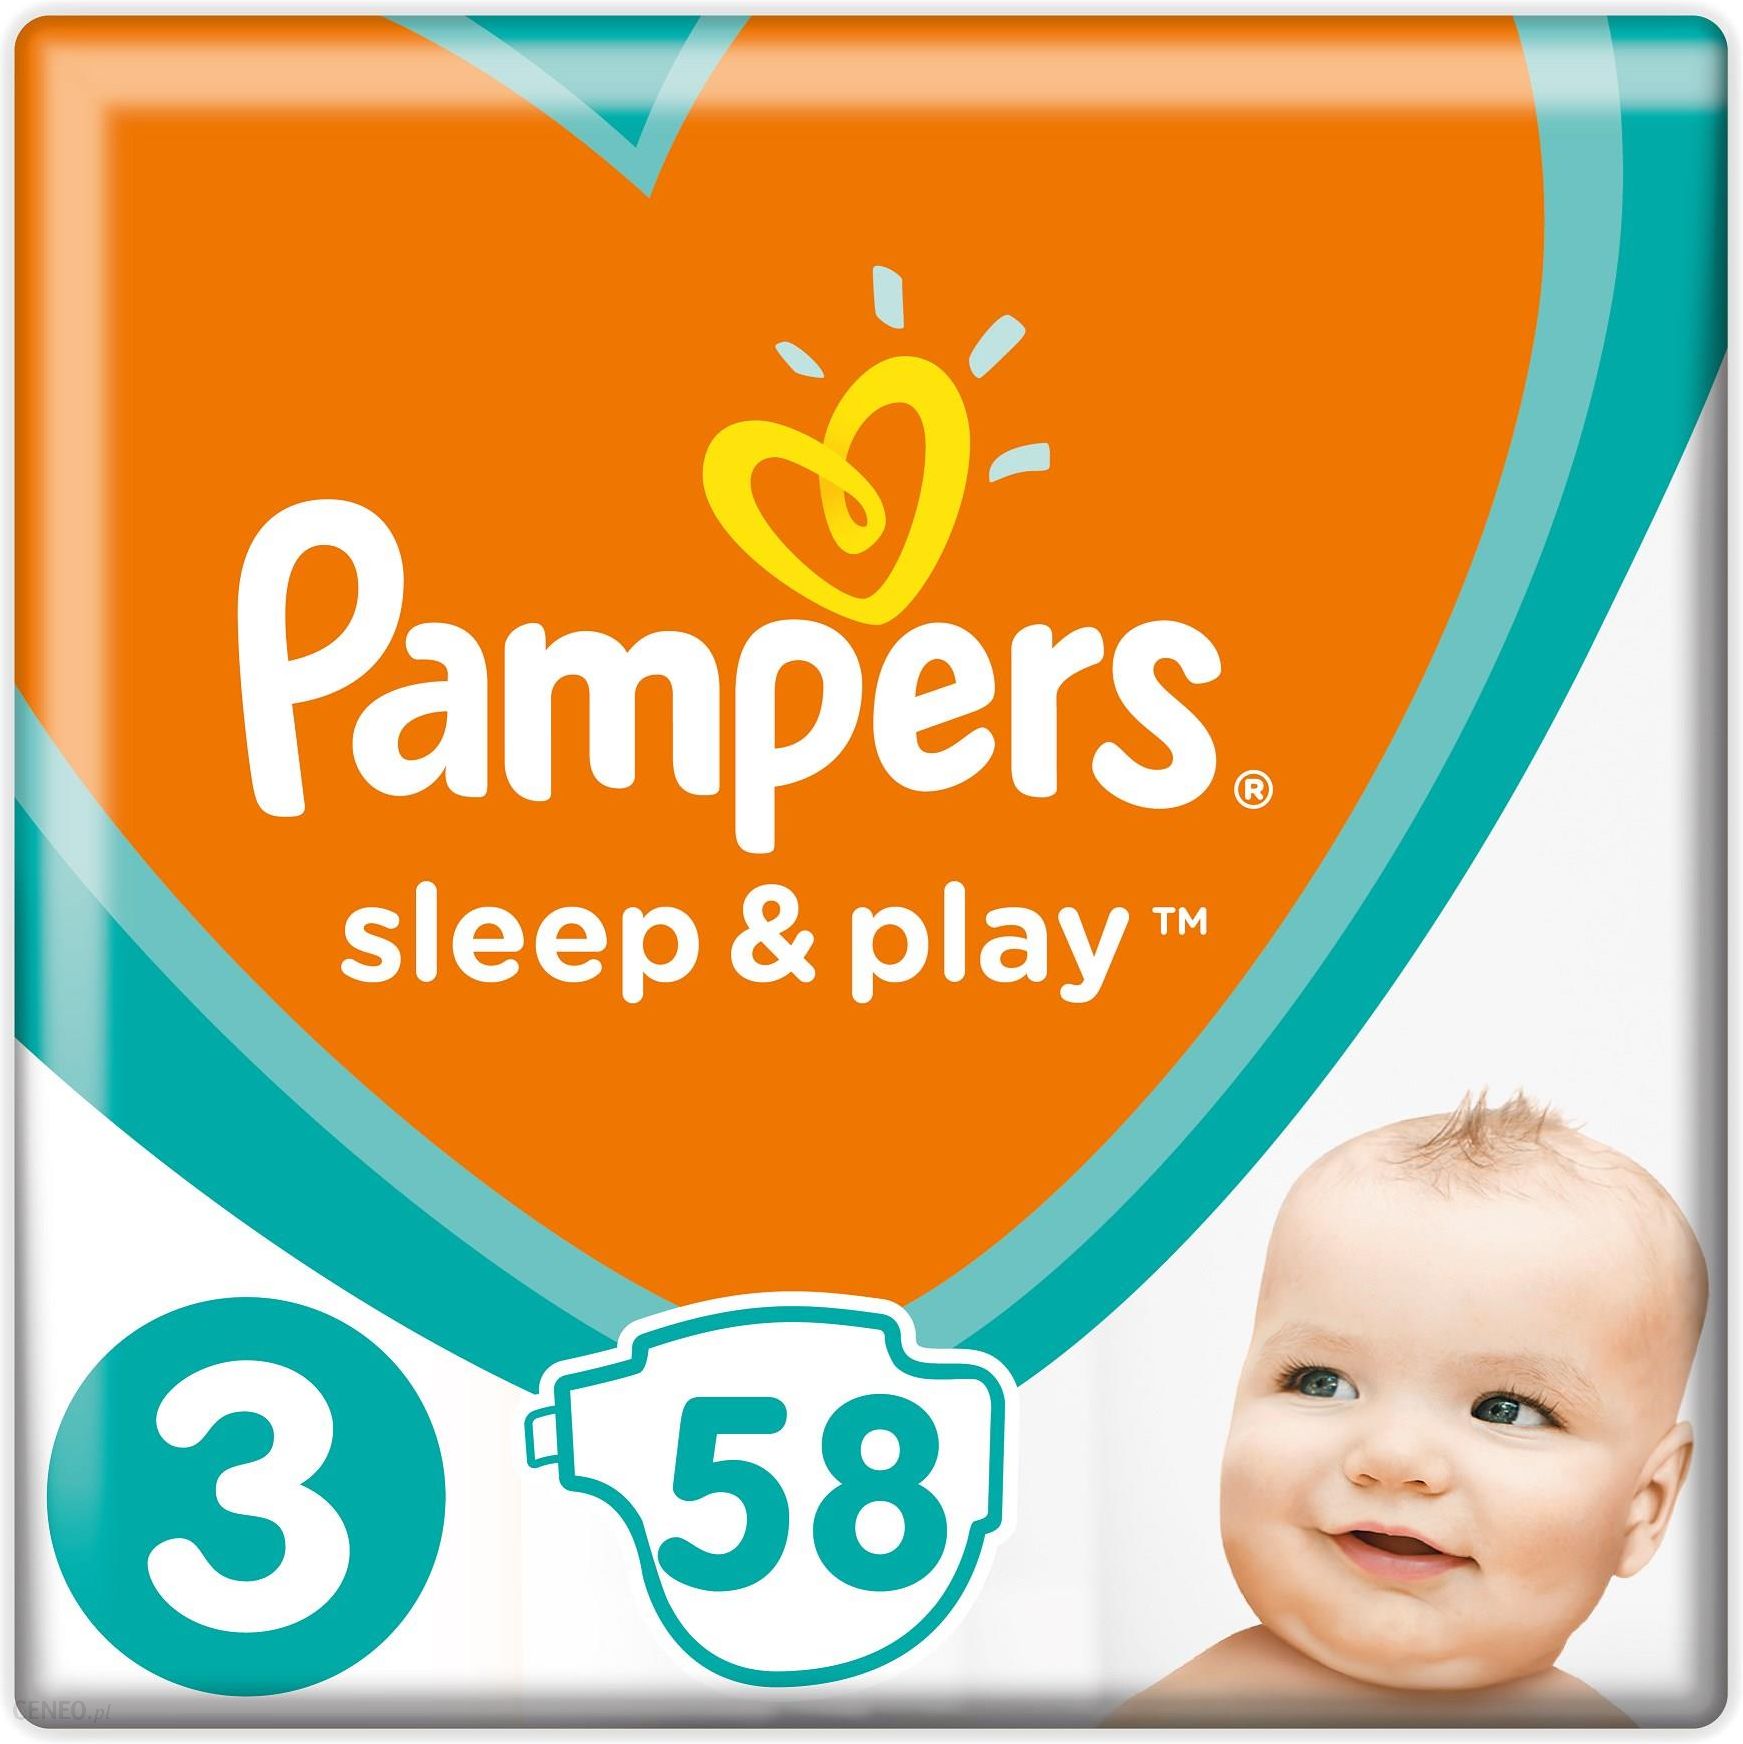 pampers premium care made in germany